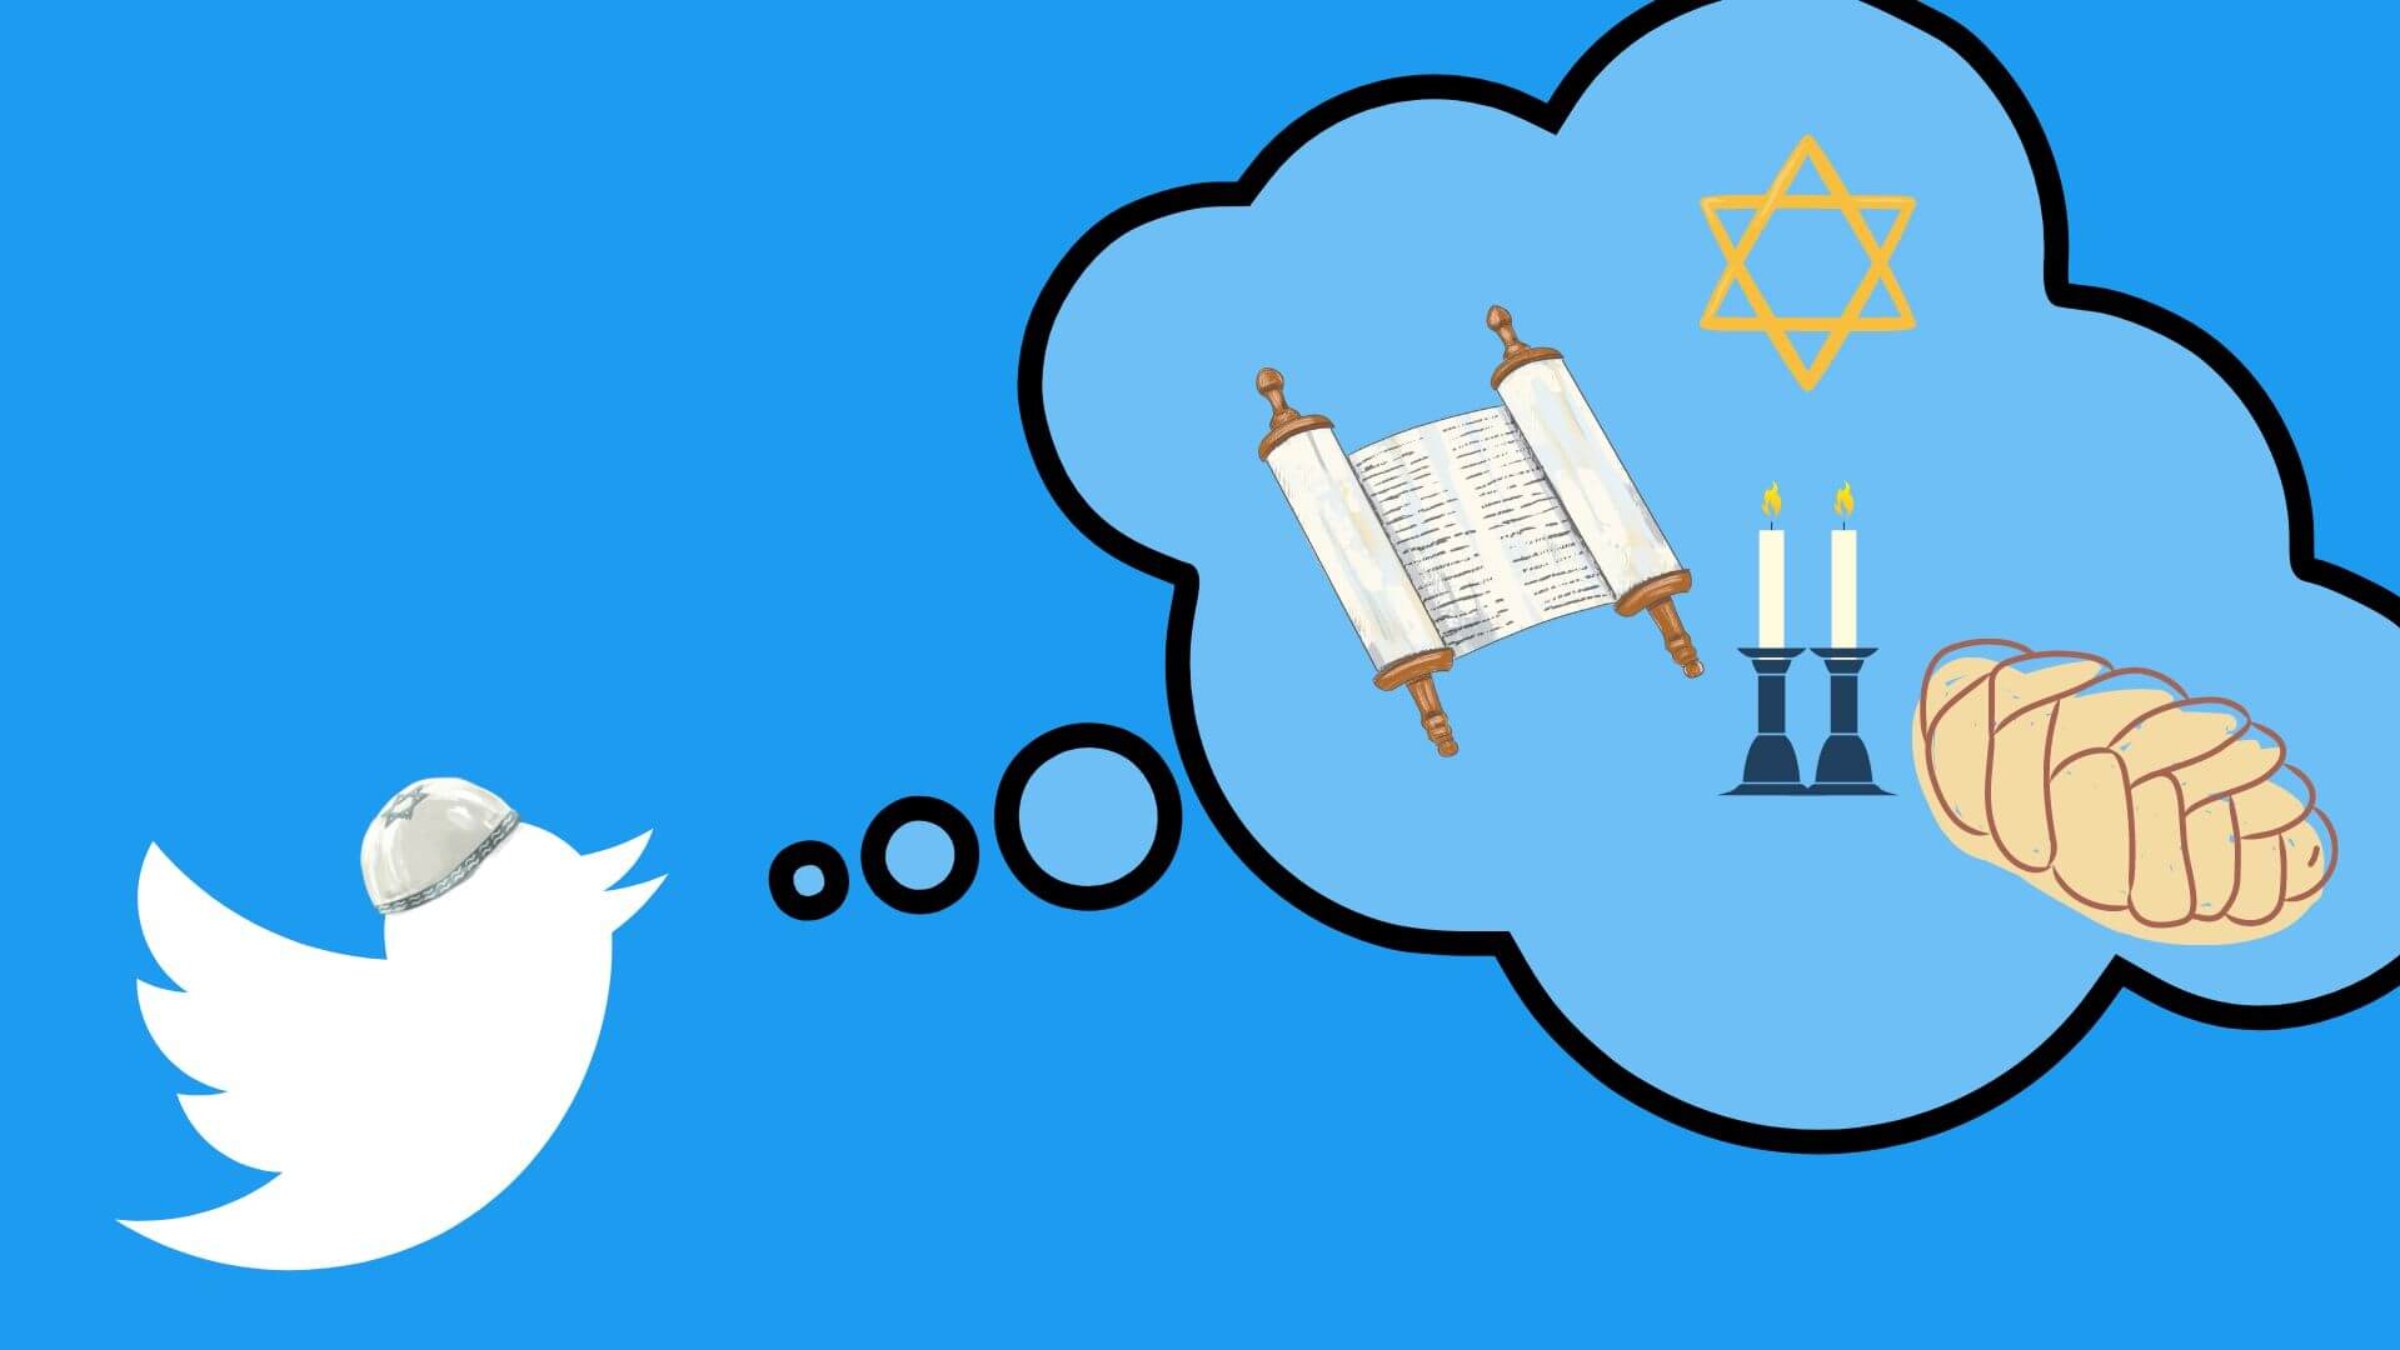 Has Twitter become really really Jewish?